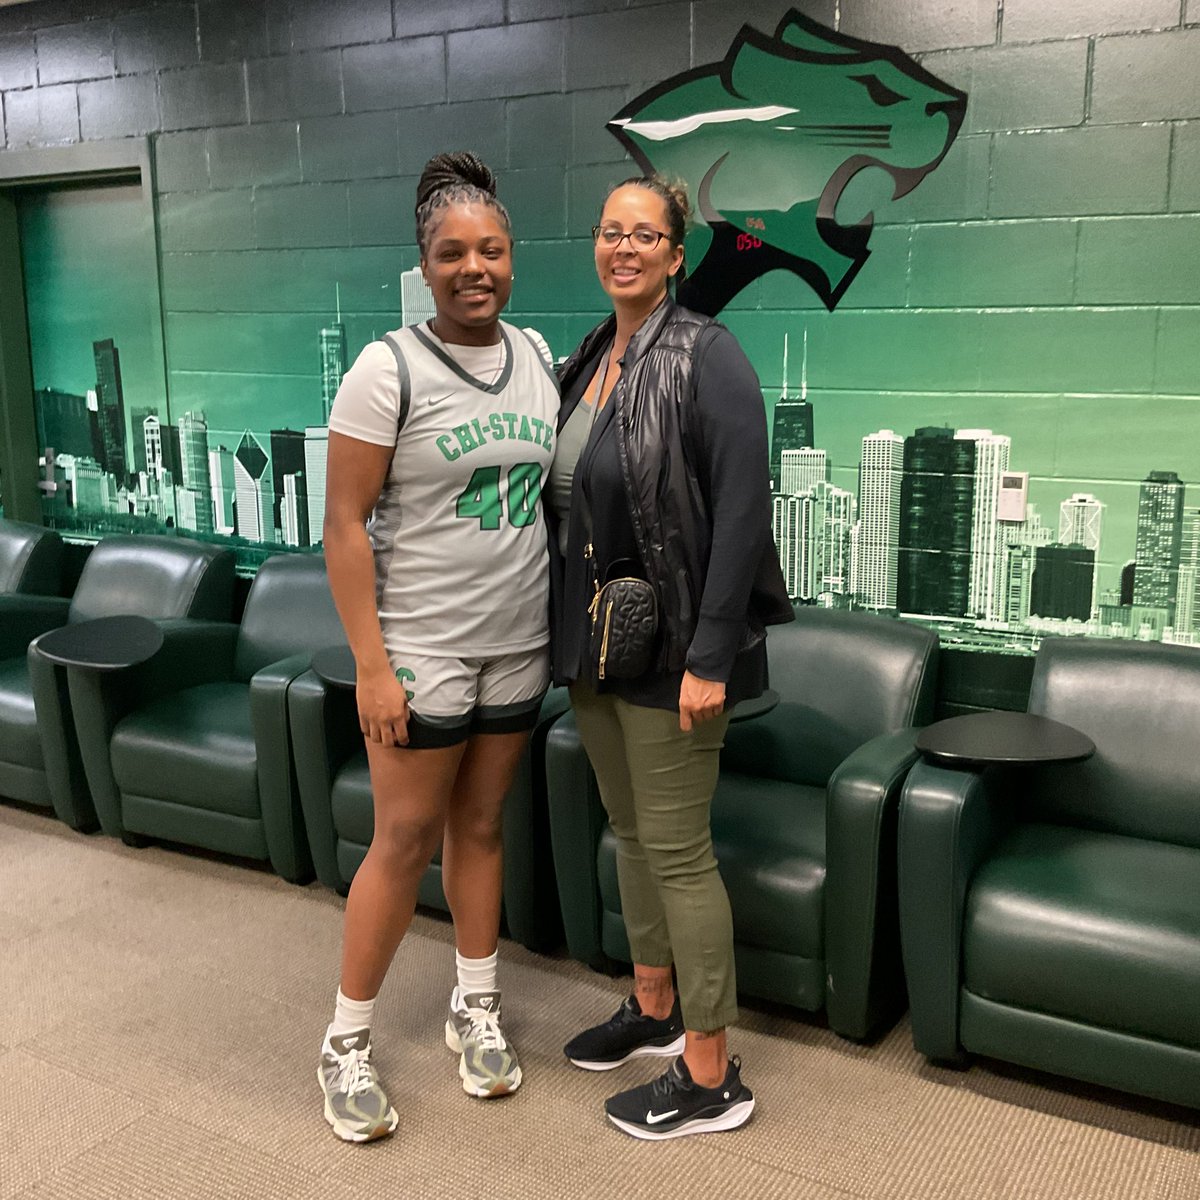 The baby of my bunch @KaylaMount34 has committed to play Basketball for Chicago State University Cougars🙌🏾💚🤍🖤Windy City do me a favor:Be good to my Motor City Girl🥰. #Proudparents
@corryne00 @ChiStateWBB @CasstechW @CTFIREDUP